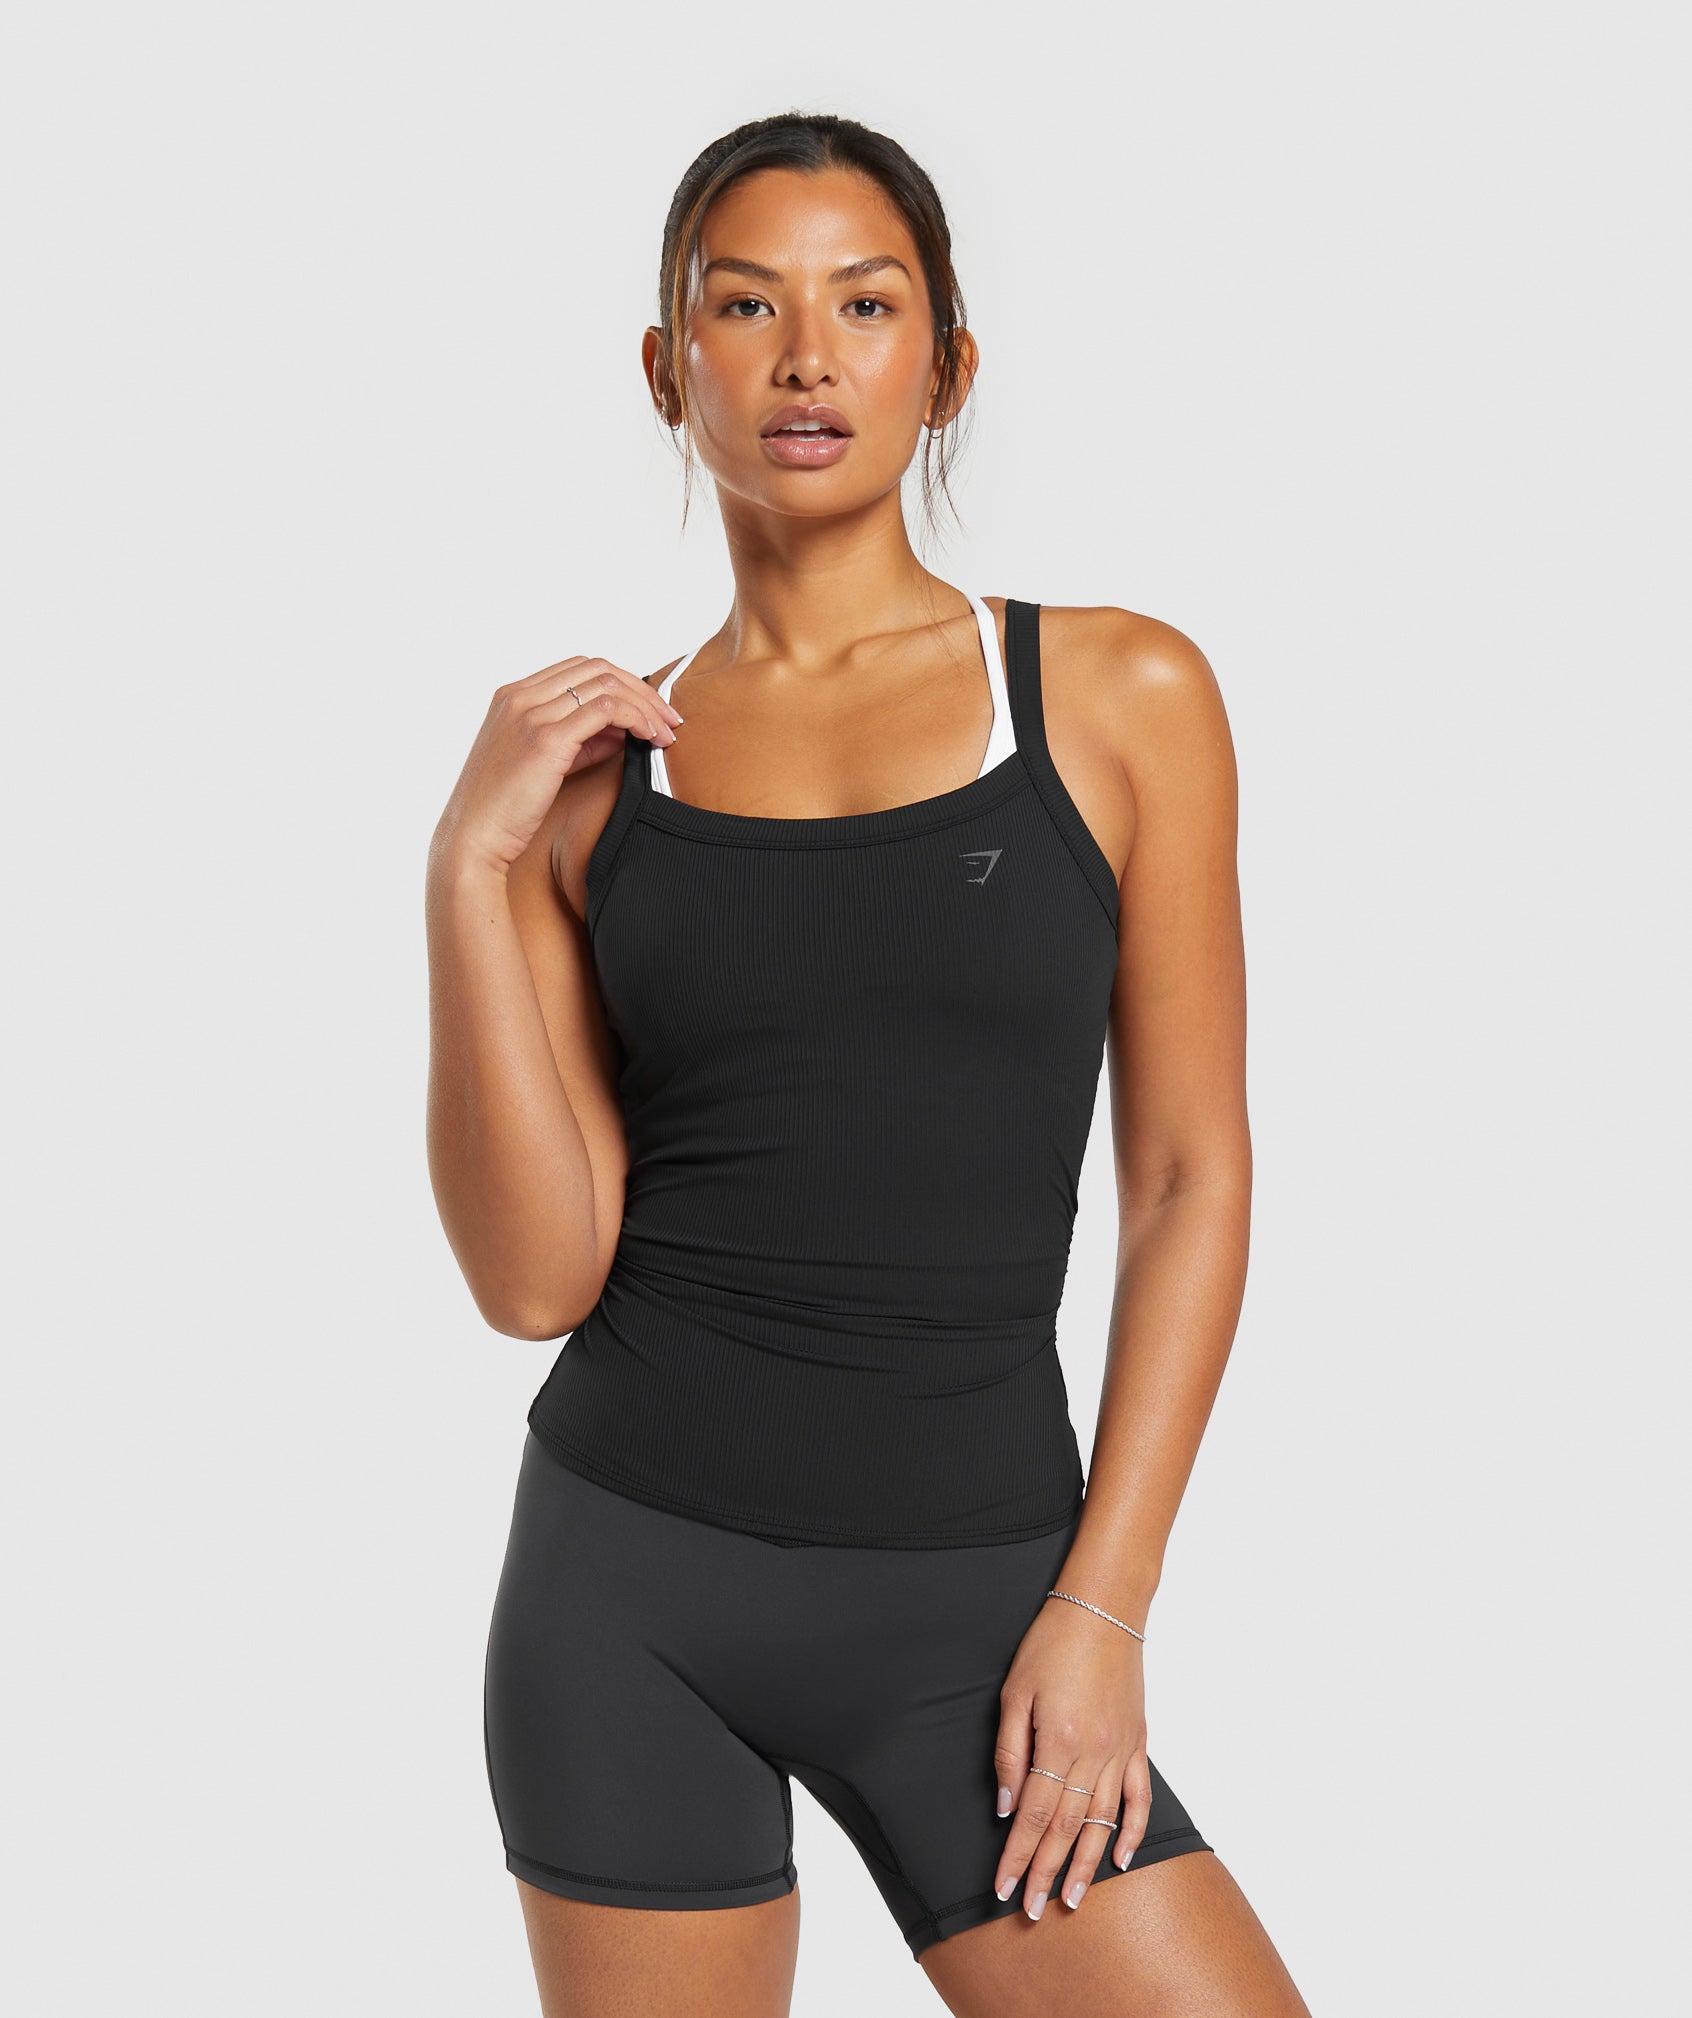 Relaxed Fit Racerback Workout Tank Top for Women – The Yoga Line